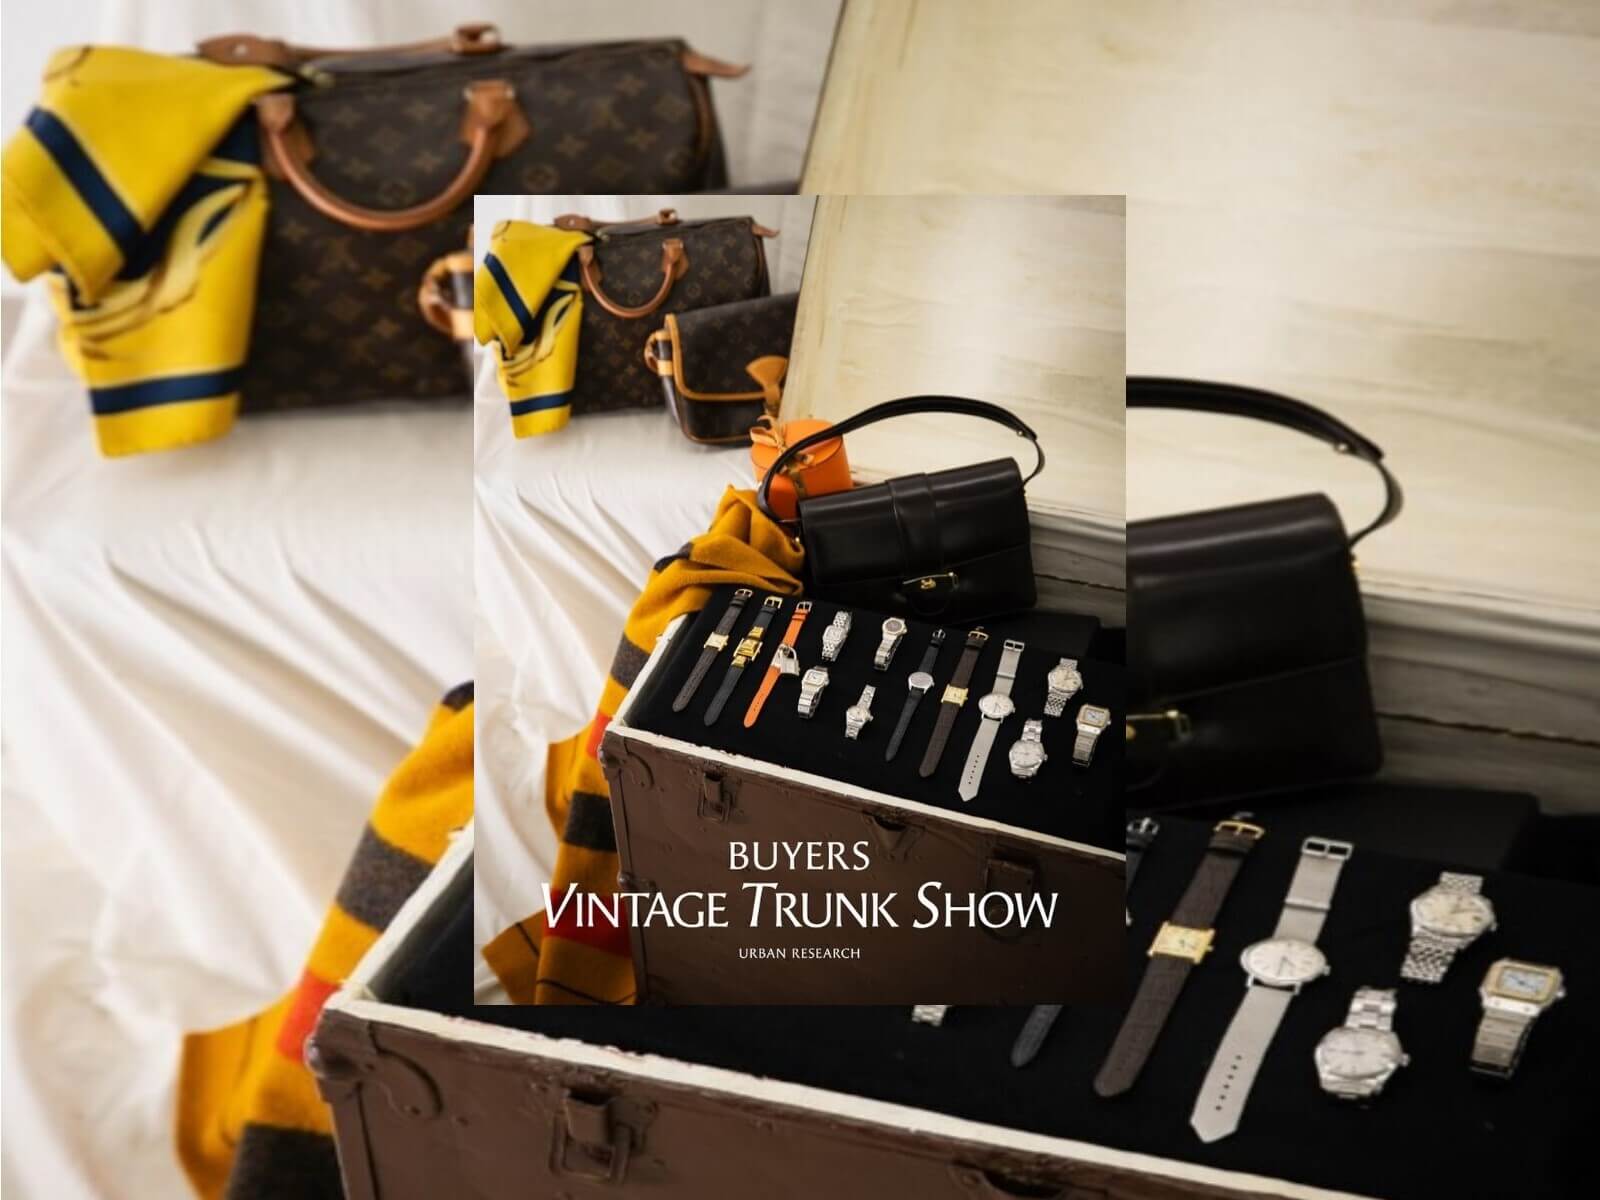 URBAN RESEARCH BUYERS VINTAGE TRUNK SHOW